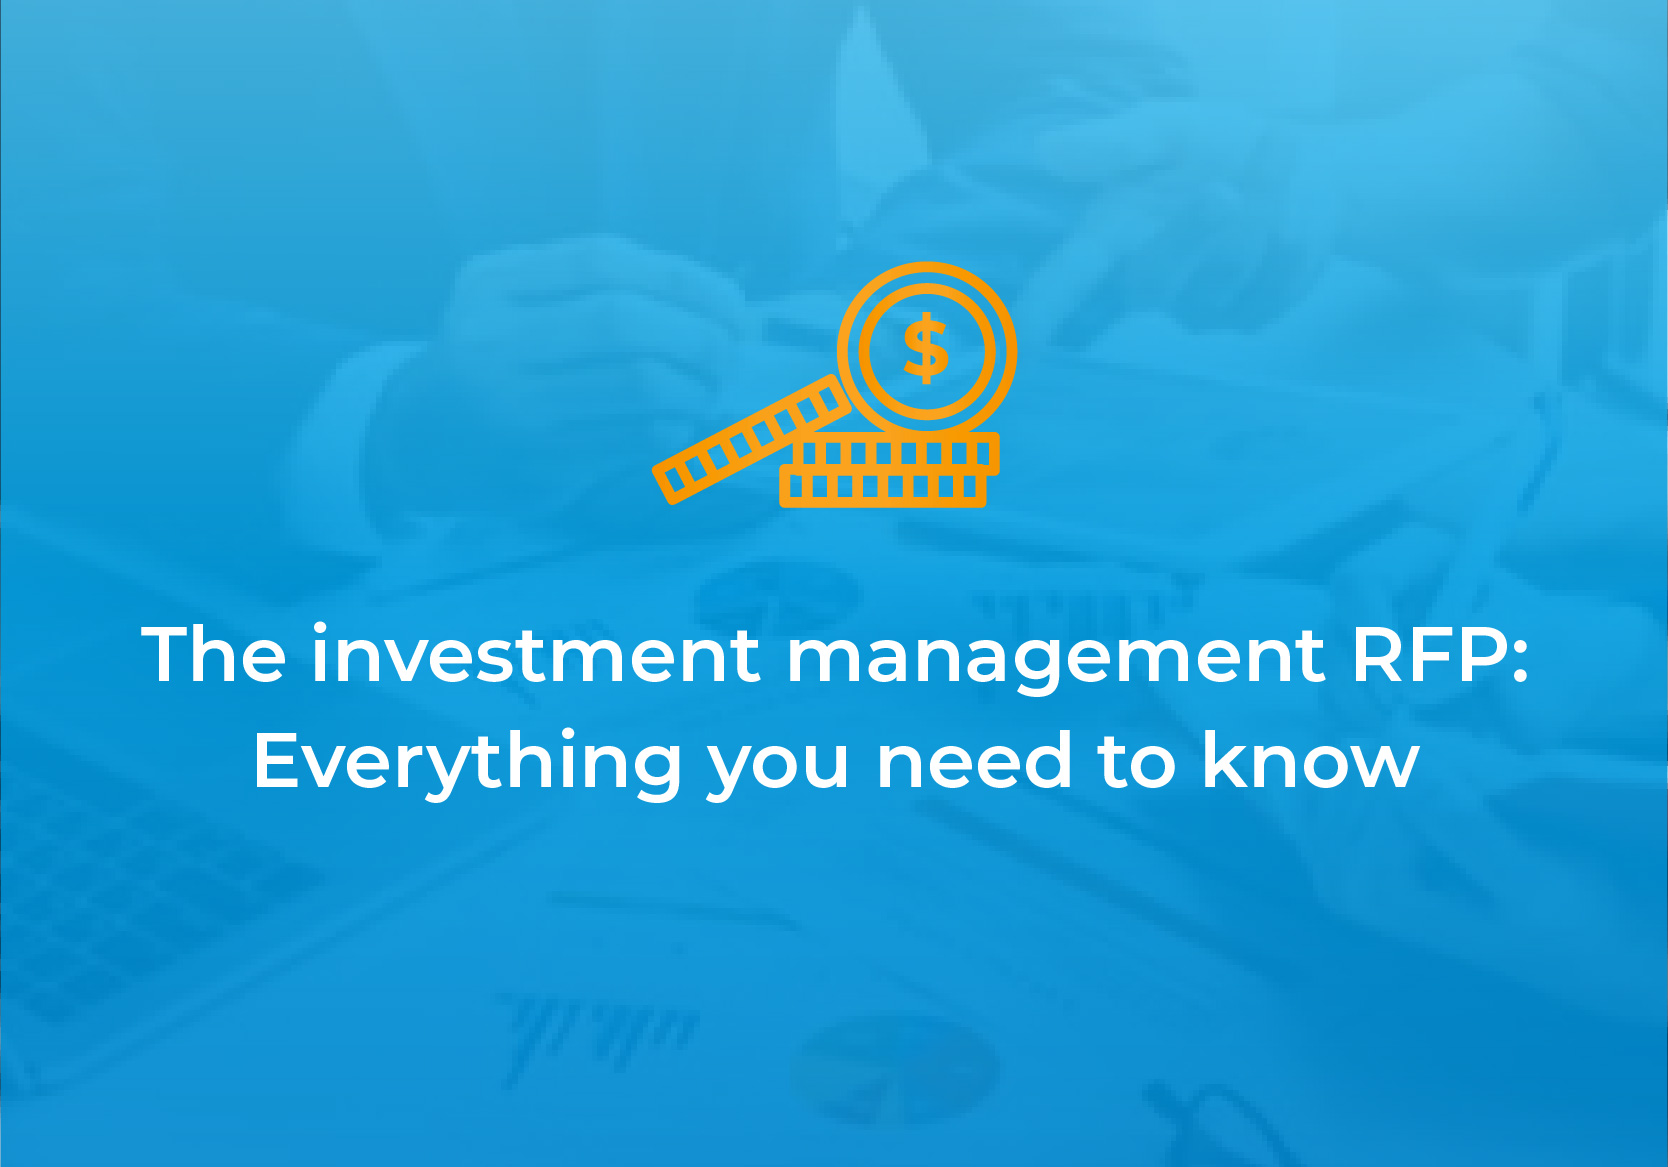 The investment management RFP: Everything you need to know